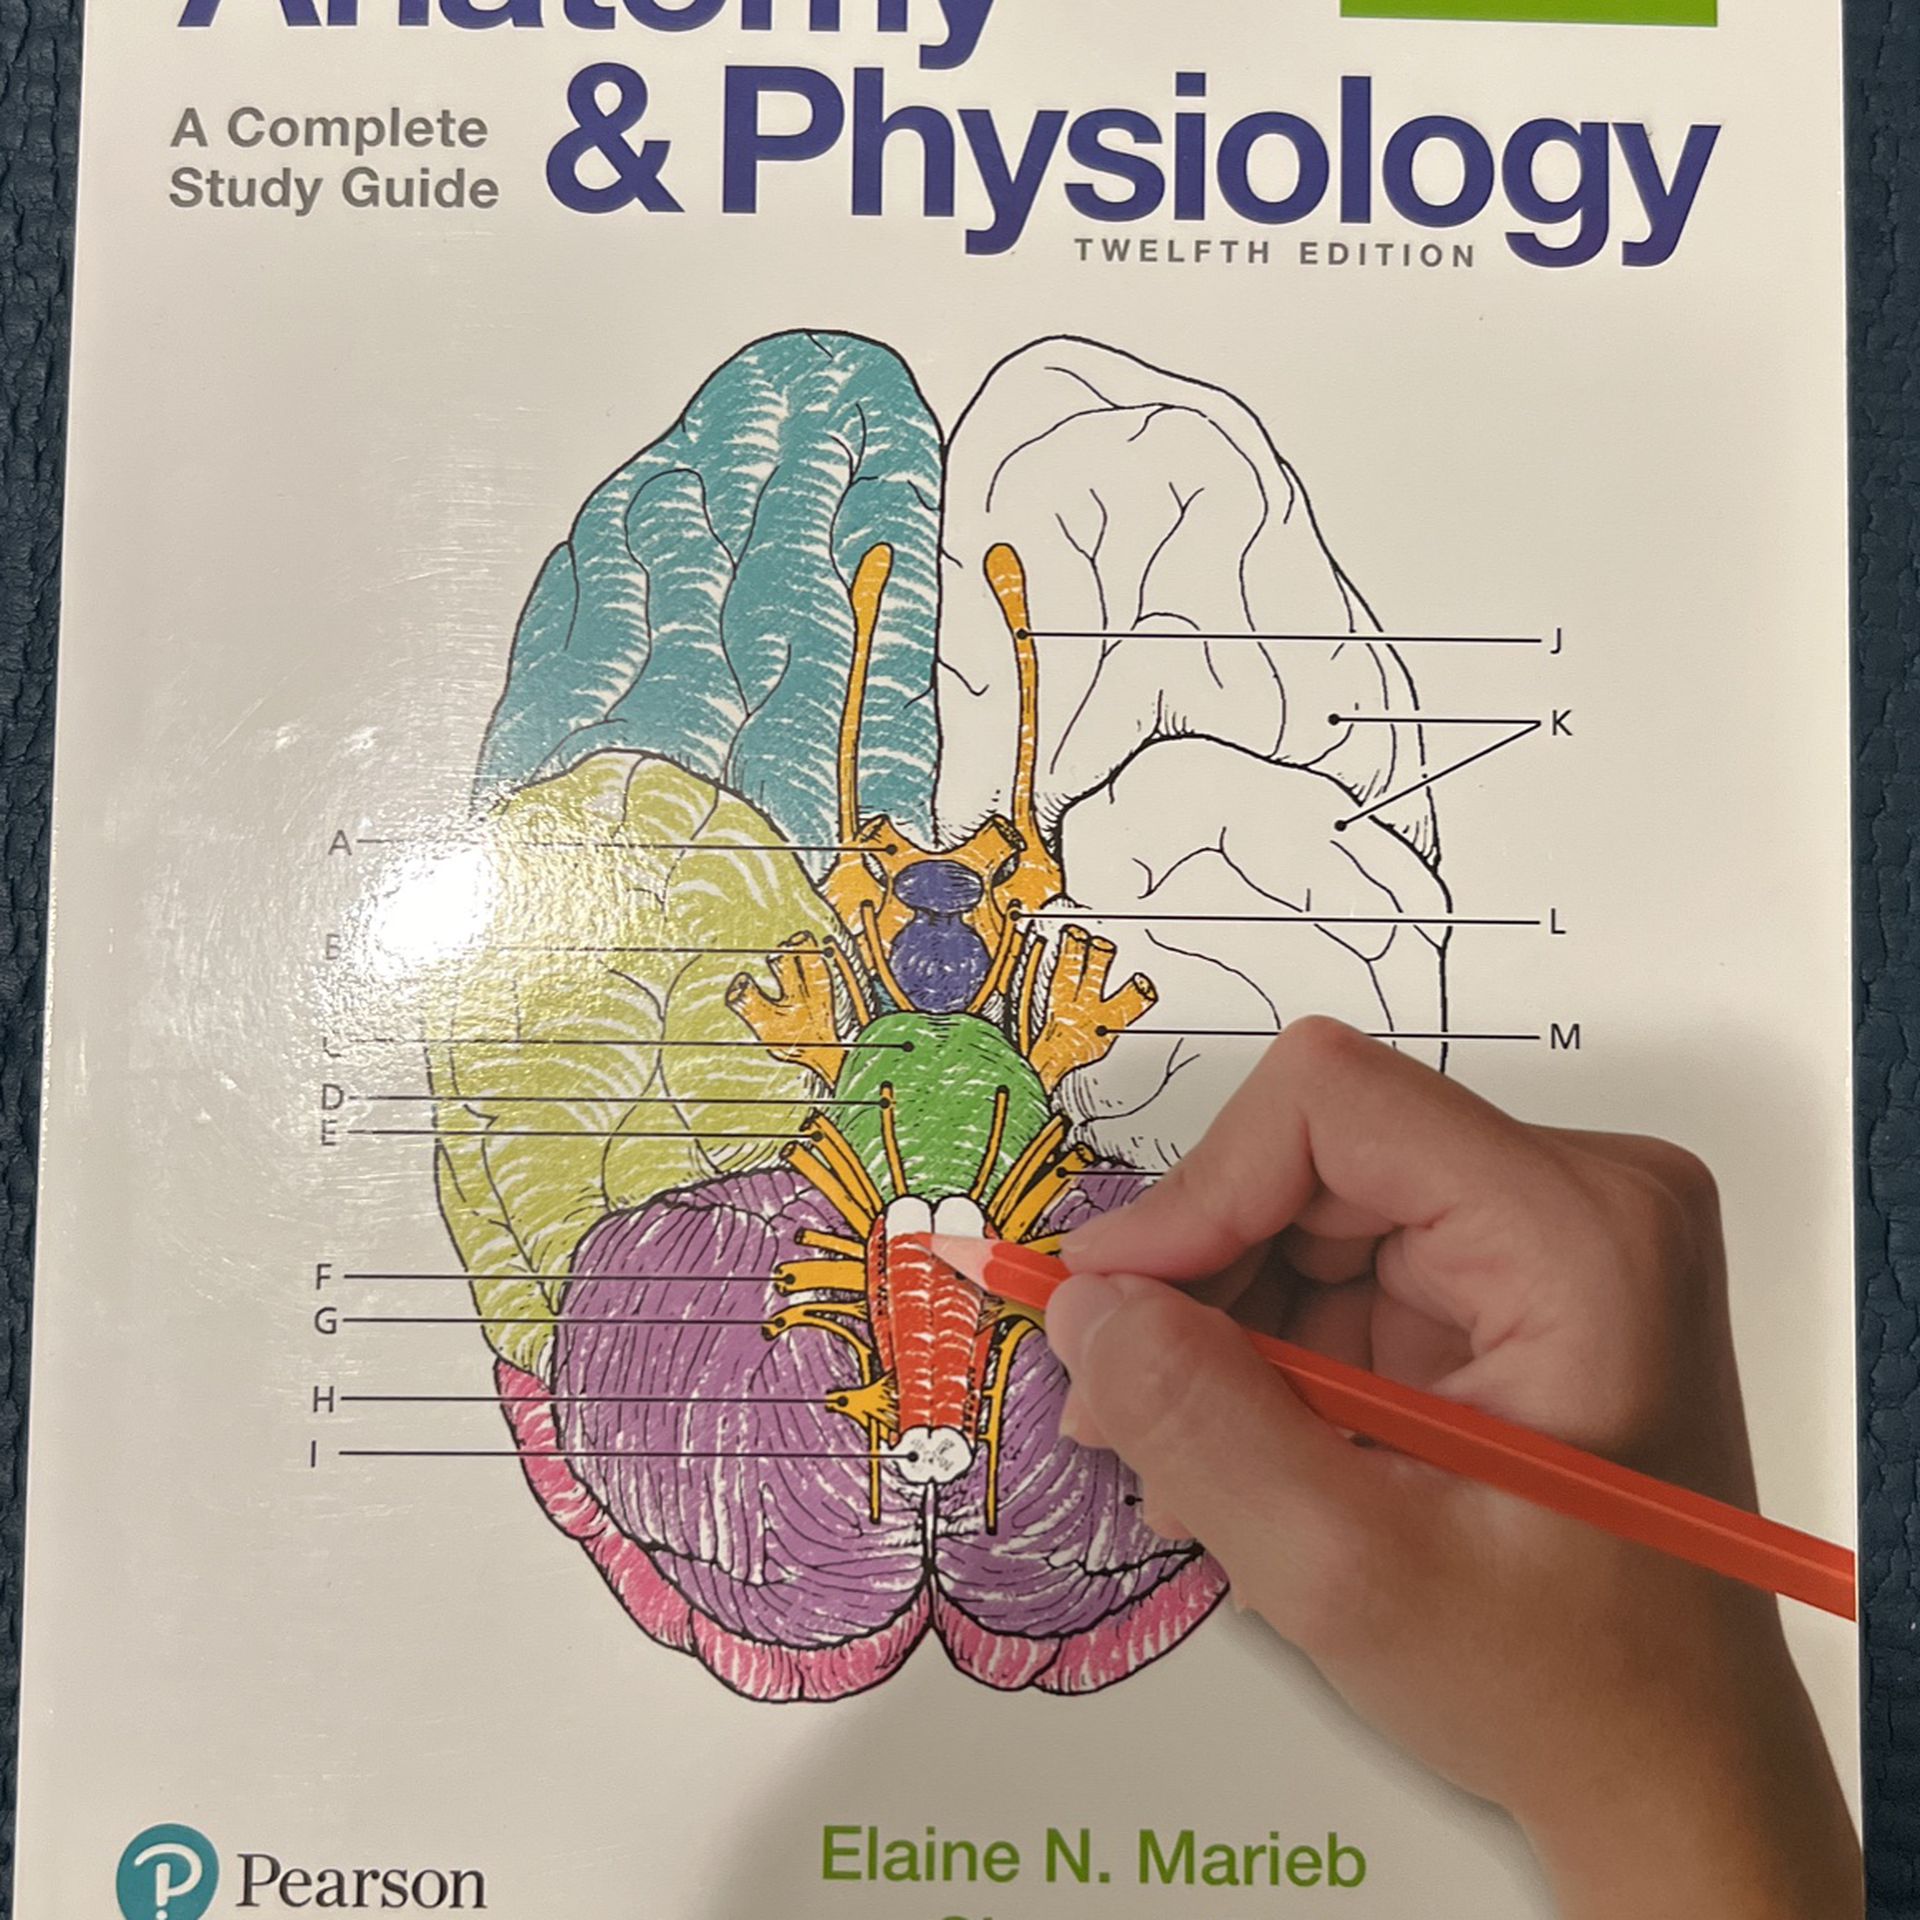 Edition　Anatomy　Pearson　in　for　12th　Physiology　OfferUp　Coloring　CA　Workbook　Sale　Los　Angeles,